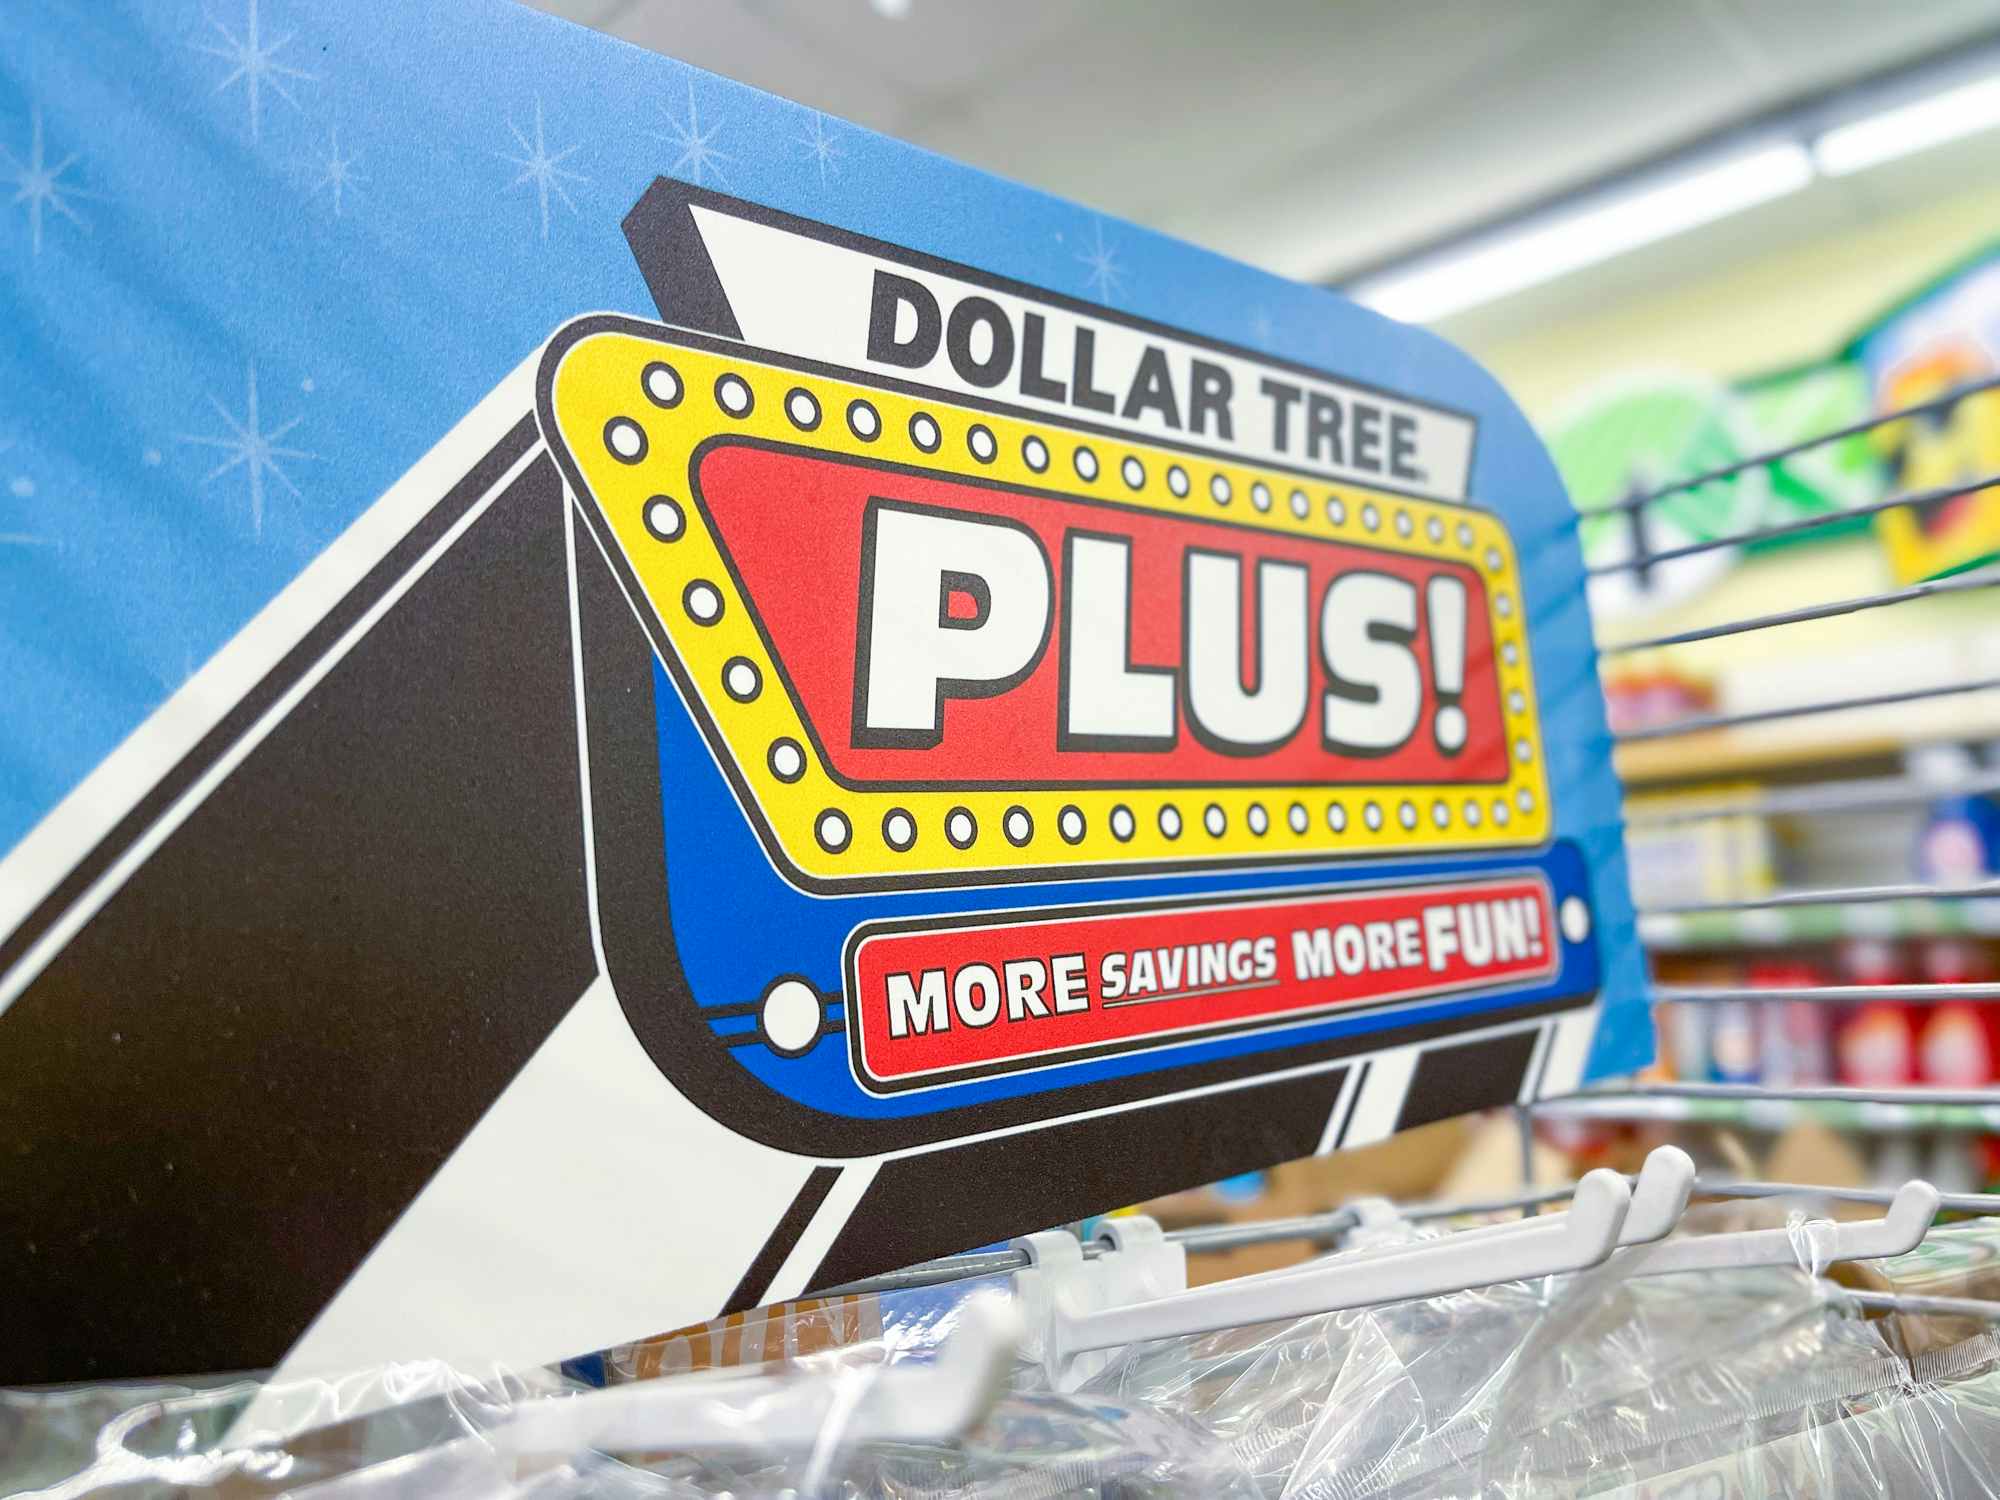 dOllAR tree plUS???? WhAts ThAt??? I DidNt know ThErE waS a 5